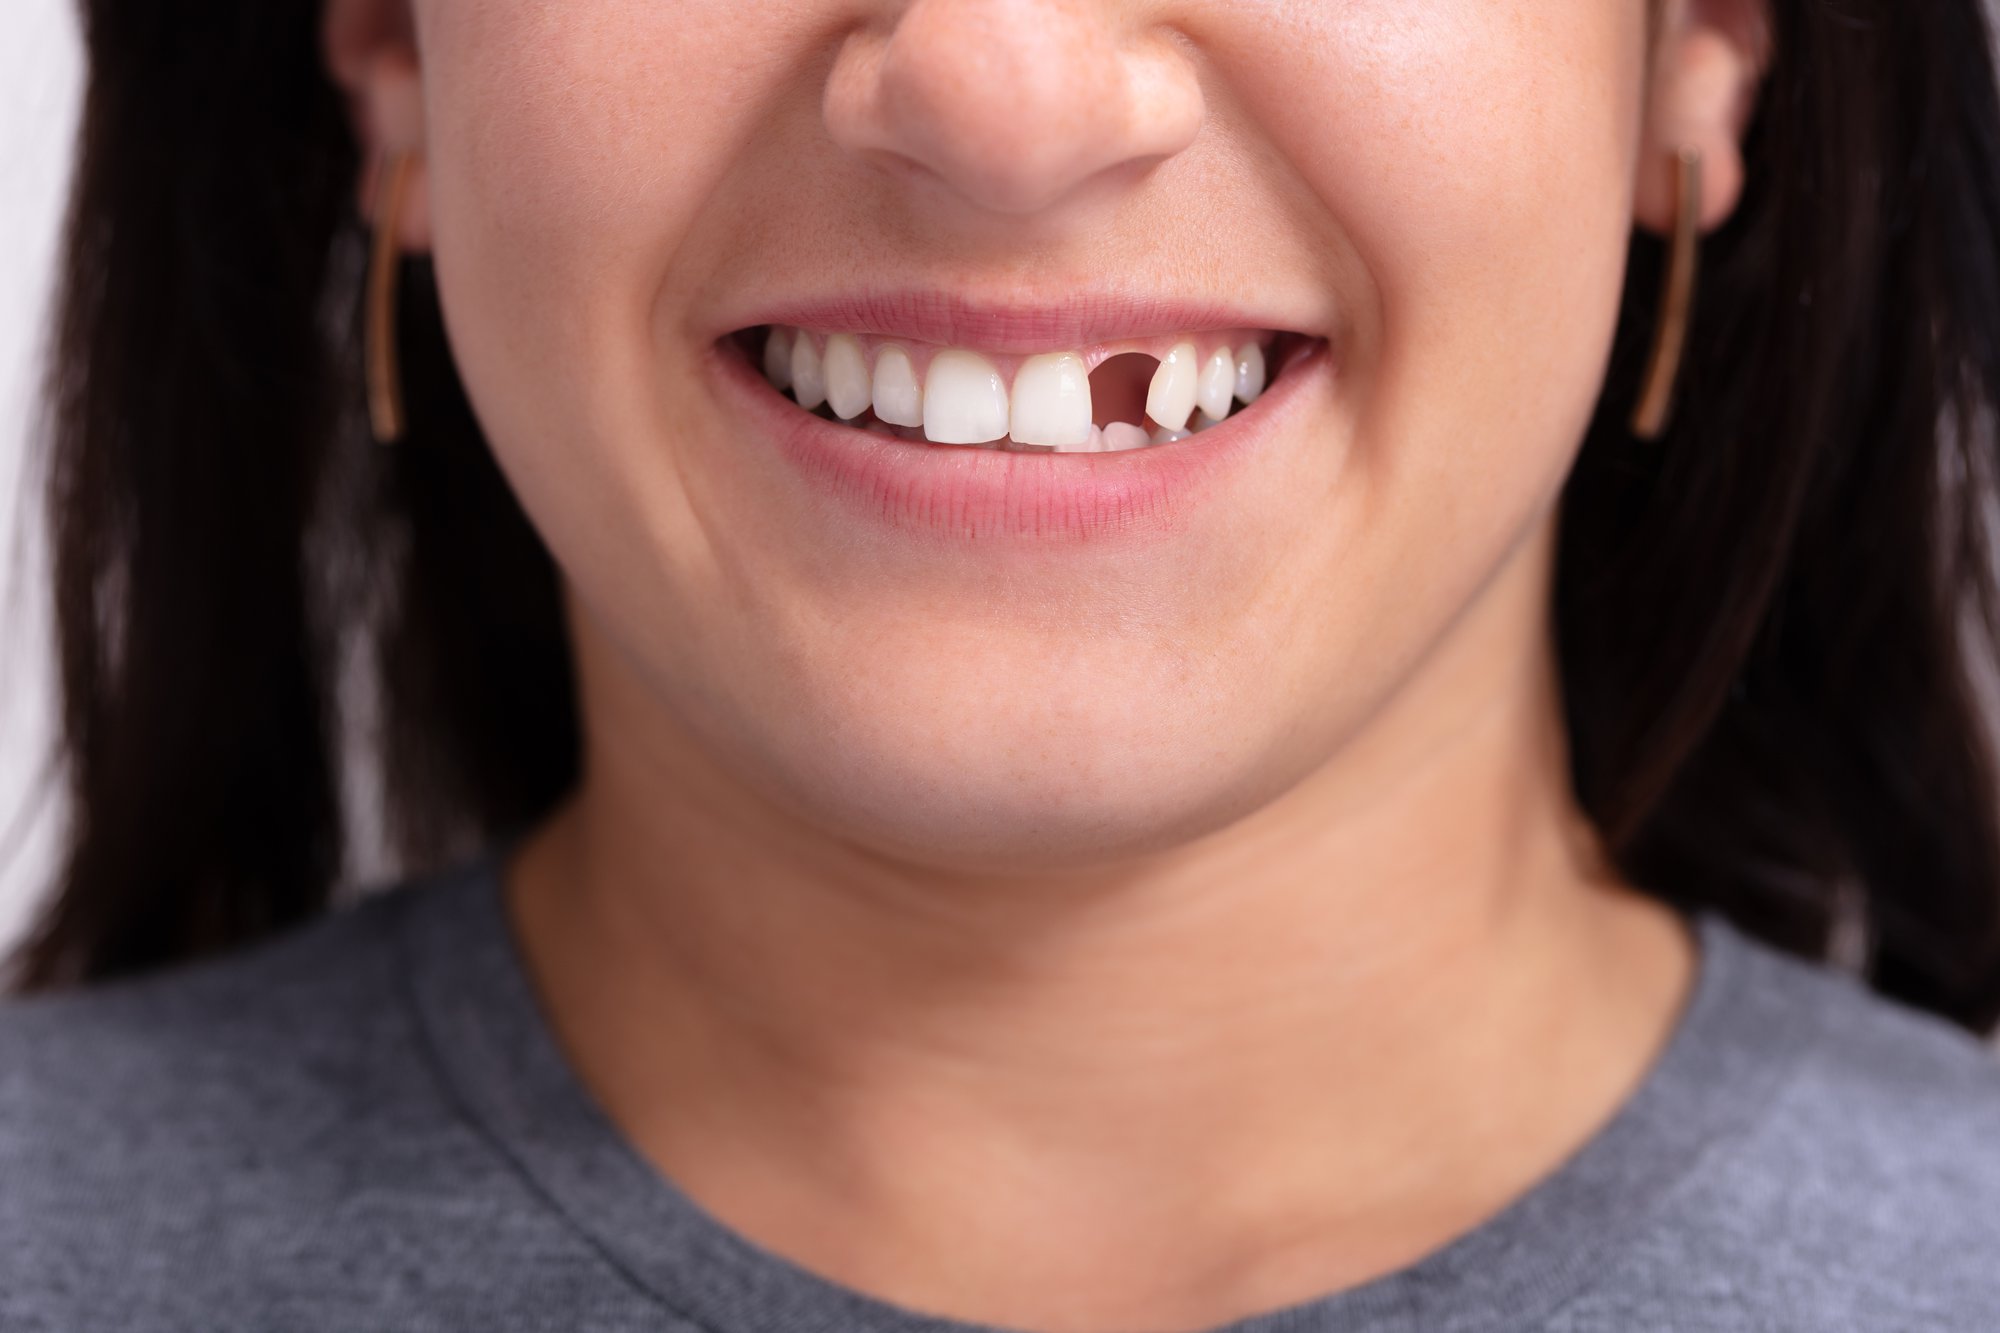 Lost Your Tooth? All Is Not Lost: Hope After Dental Extraction